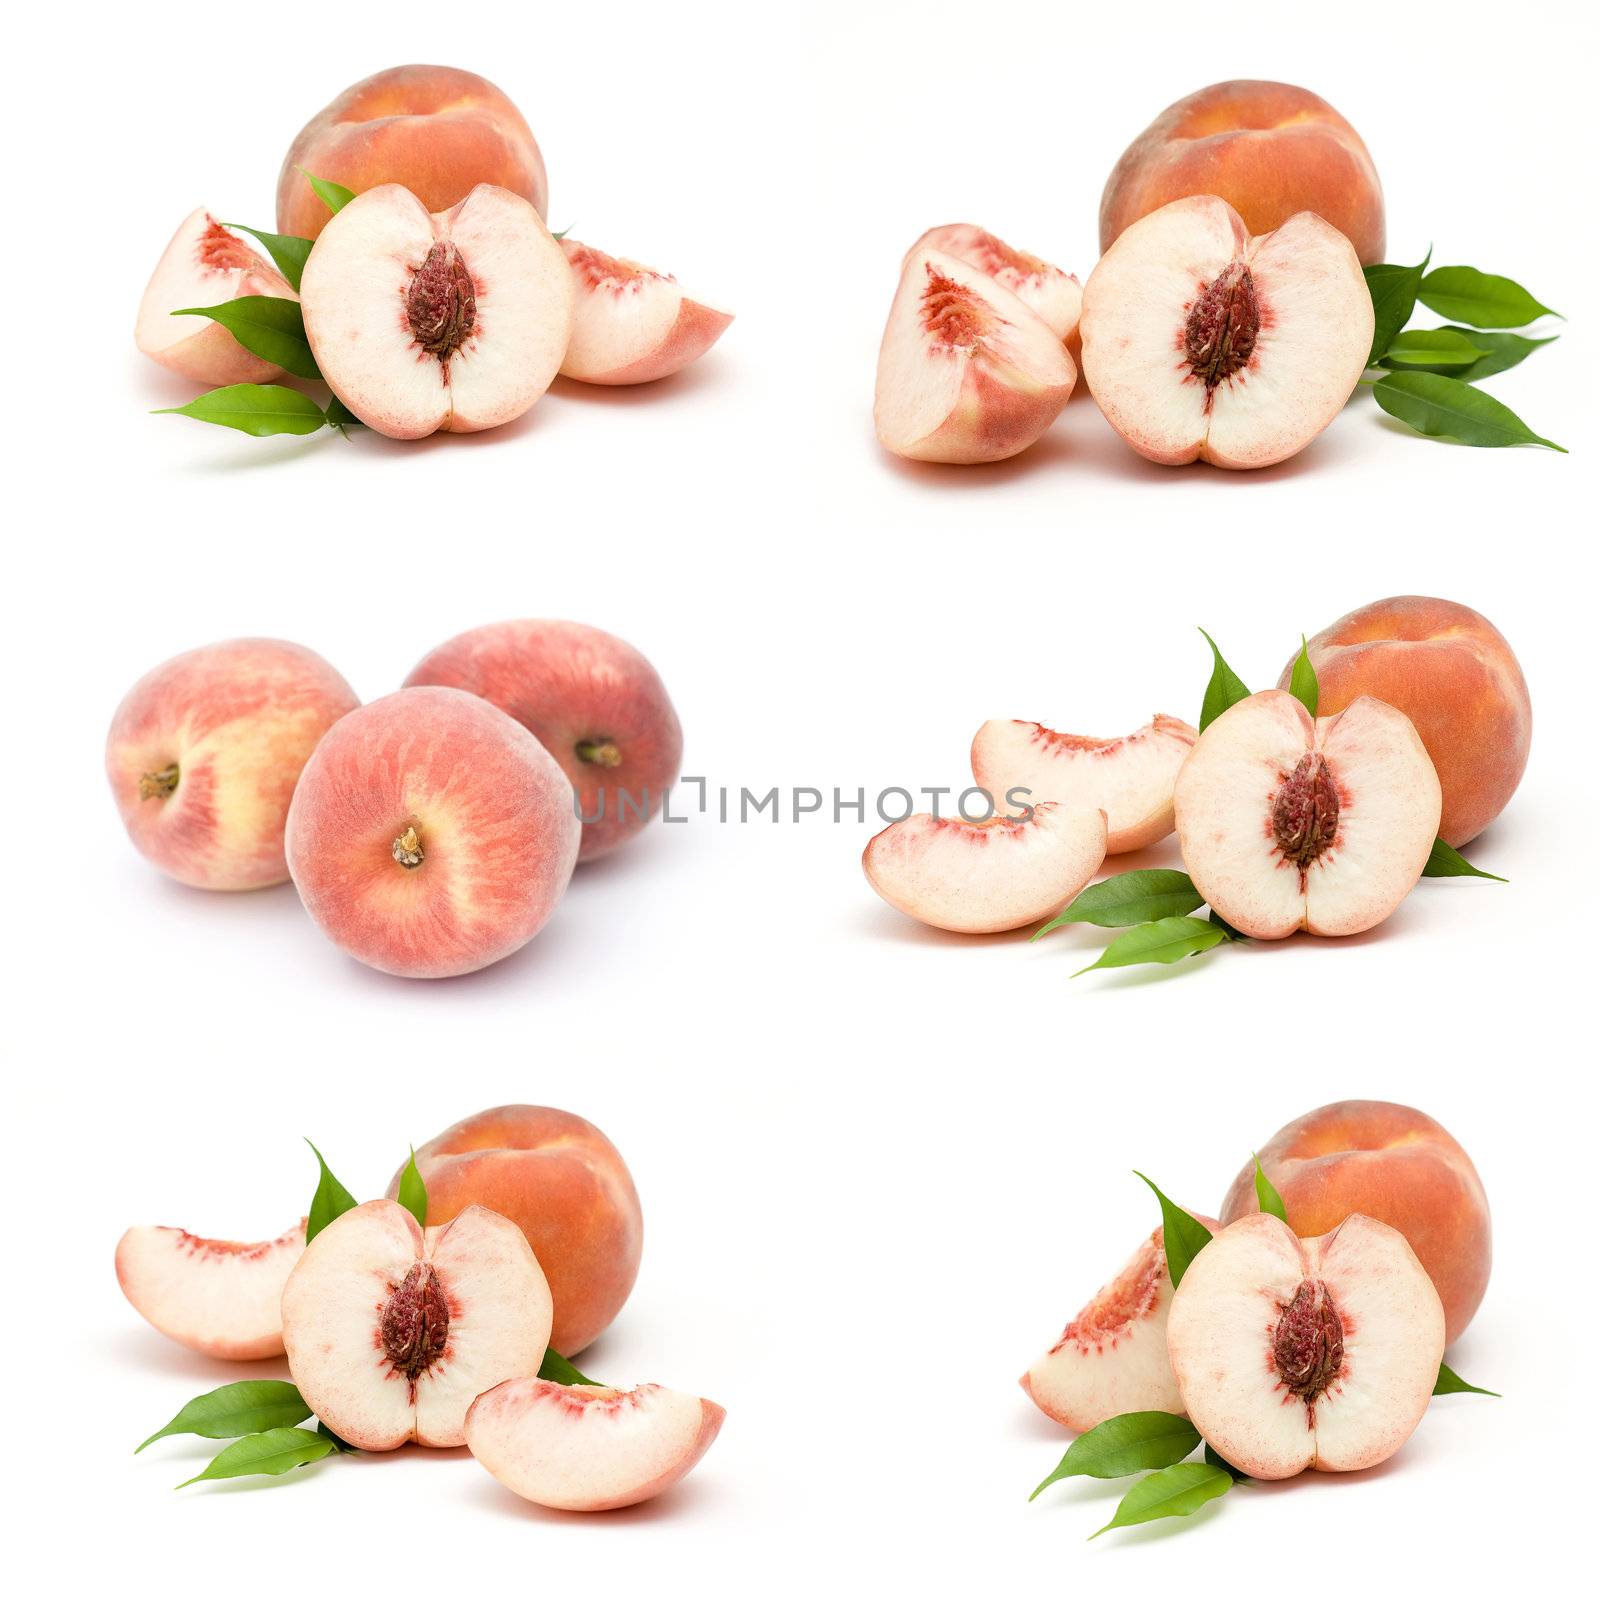 collection of fresh peach fruits by miradrozdowski